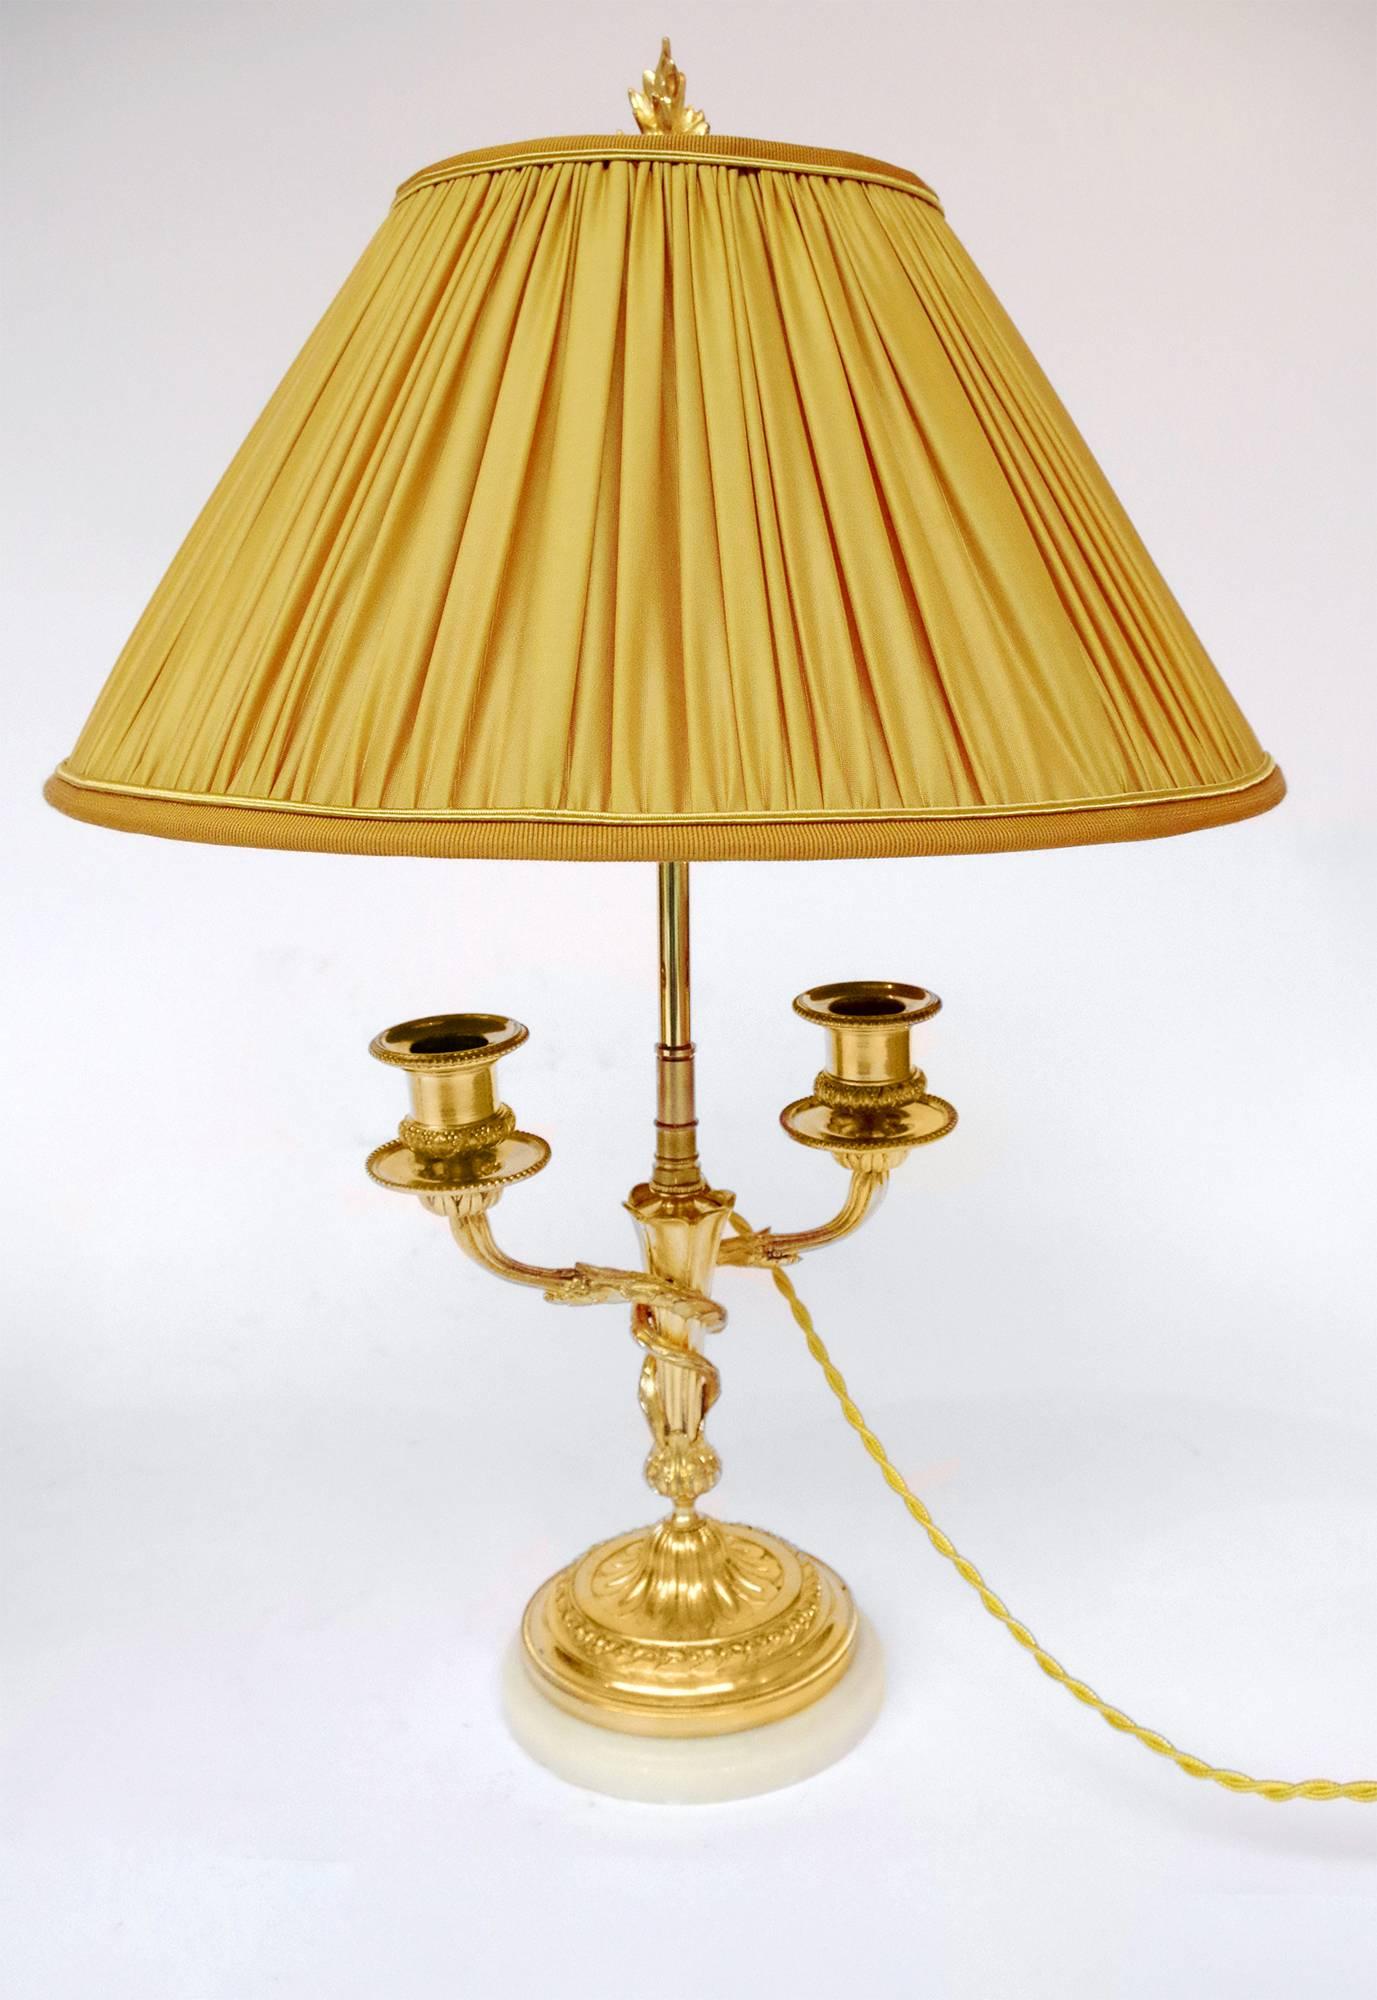 19th Century Pair of Louis XVI Style Candlesticks in Gilt Bronze-Mounted in Lamps, circa 1880